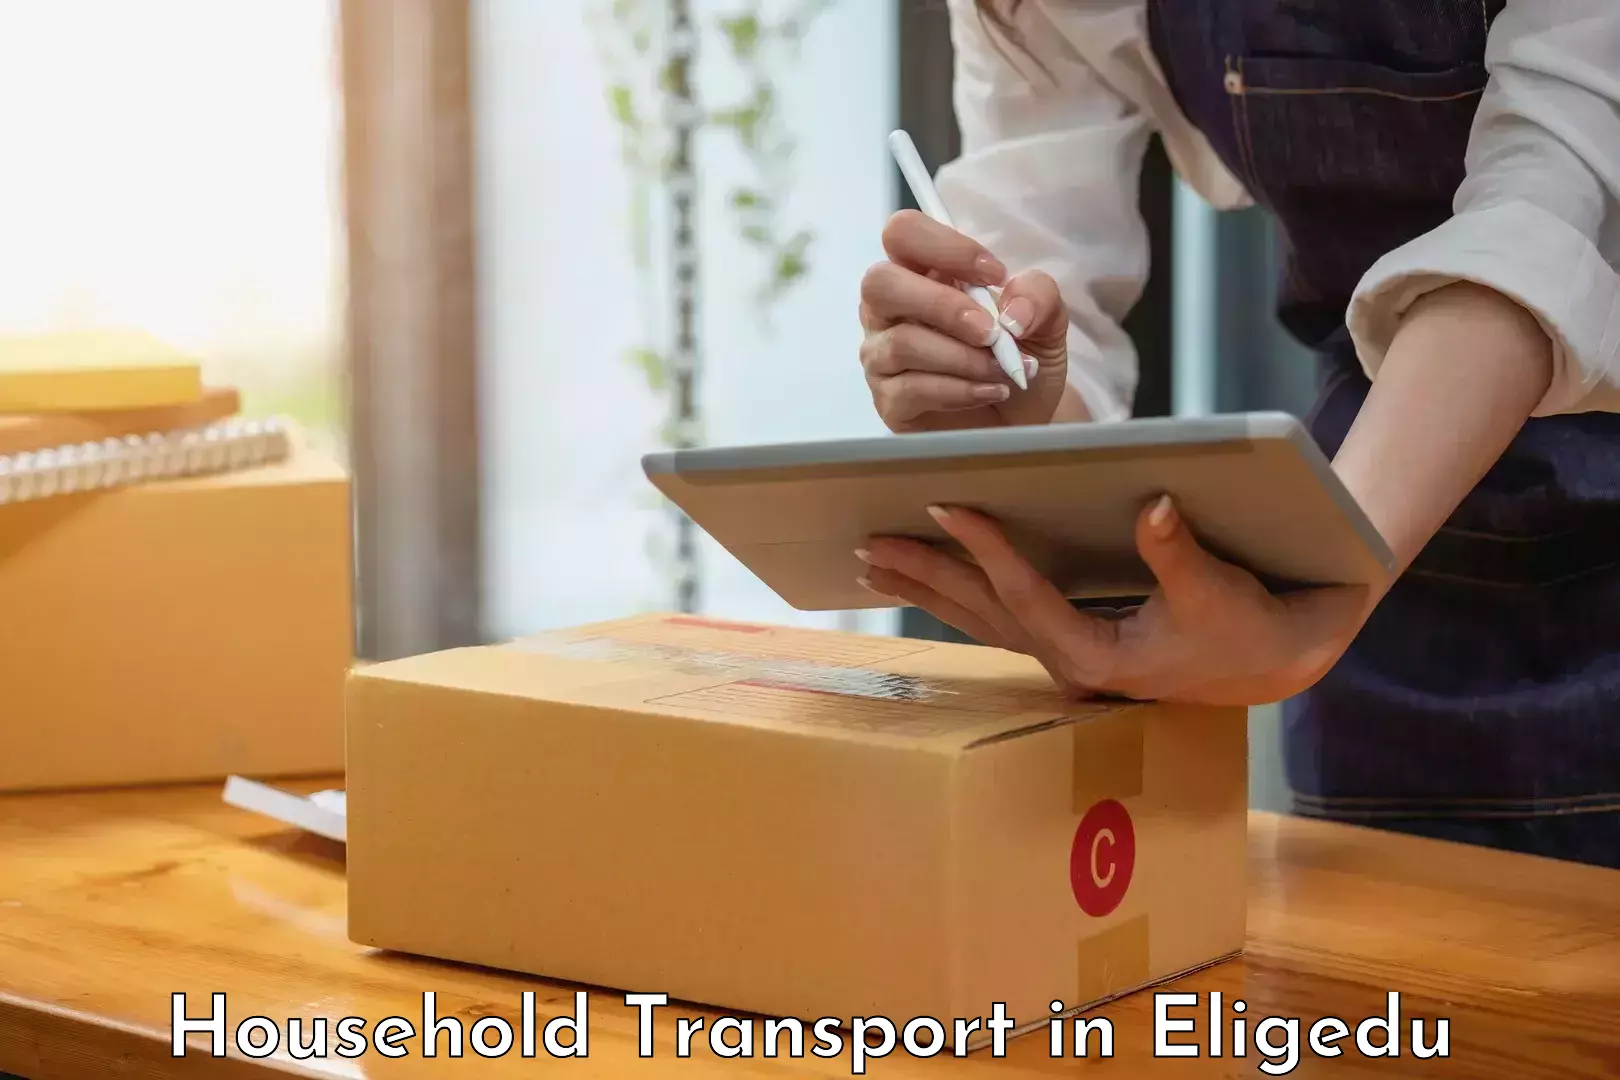 Home goods moving company in Eligedu